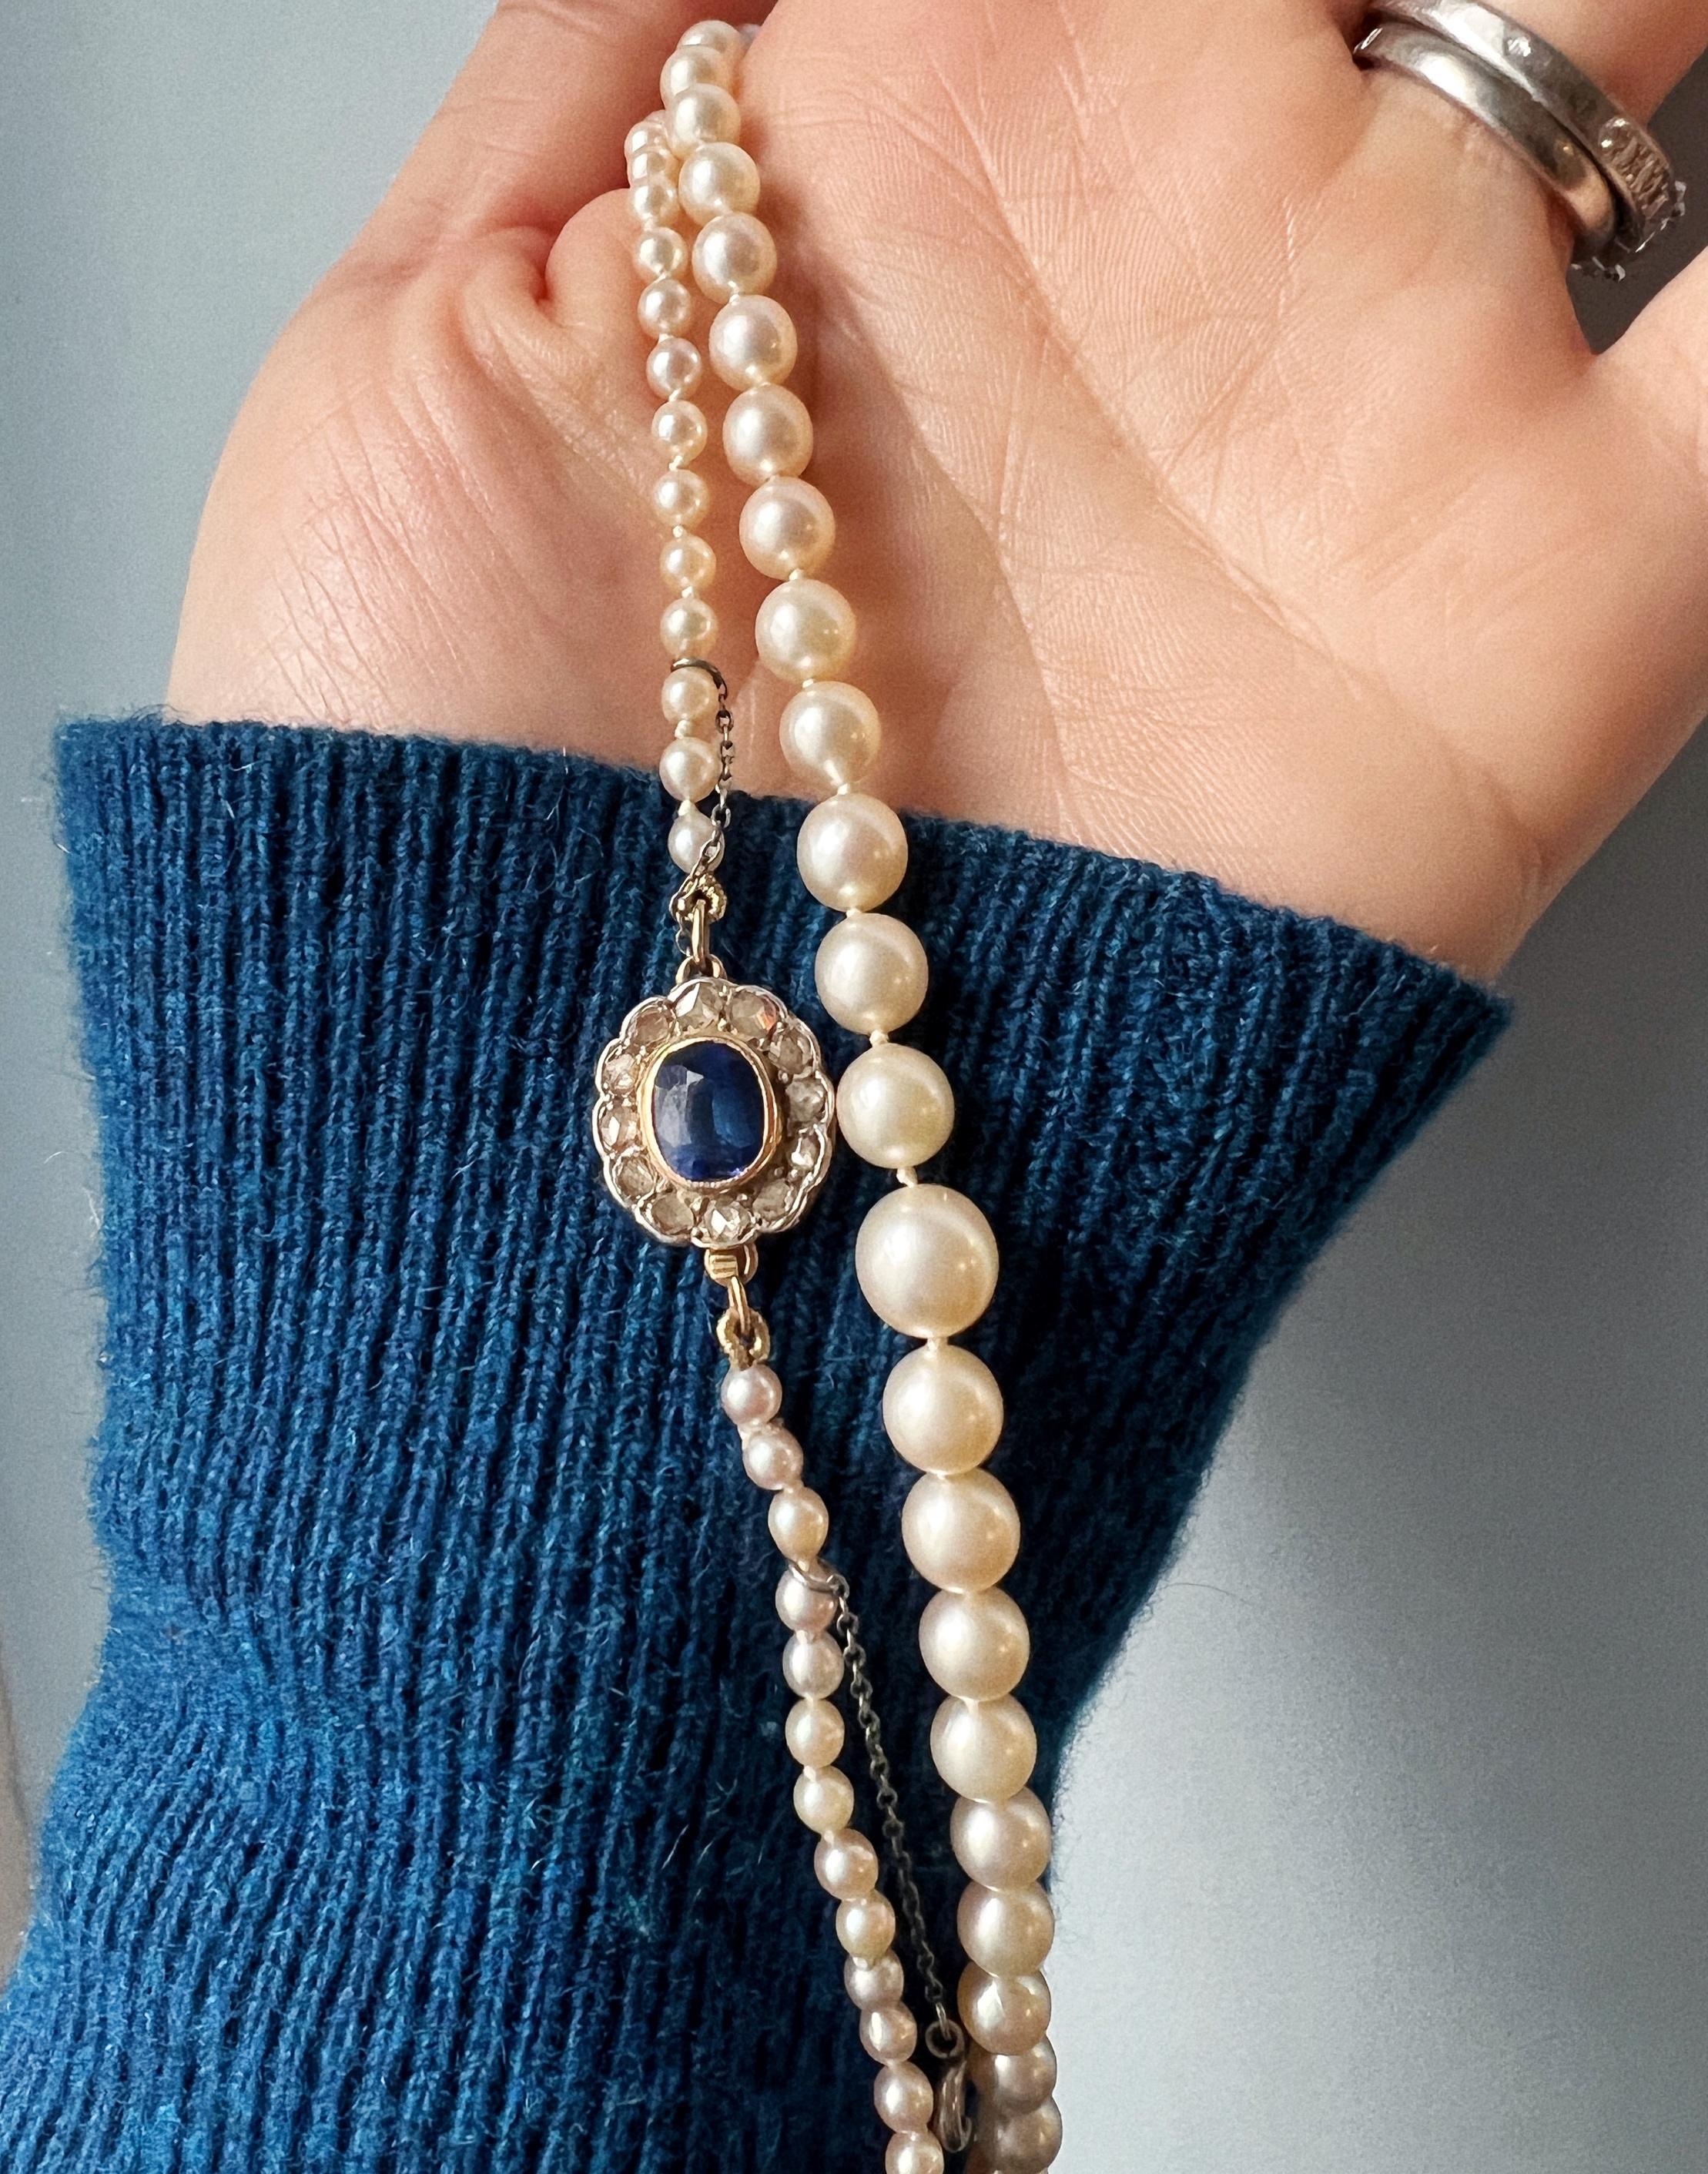 Known as the “Queen of Gems”, pearls have been coveted for centuries.

For sale a timeless single strand Akoya salt water pearl necklace, consisting of 86 rounded pearls. The pearls have a white body color and they conserved a good luster. The